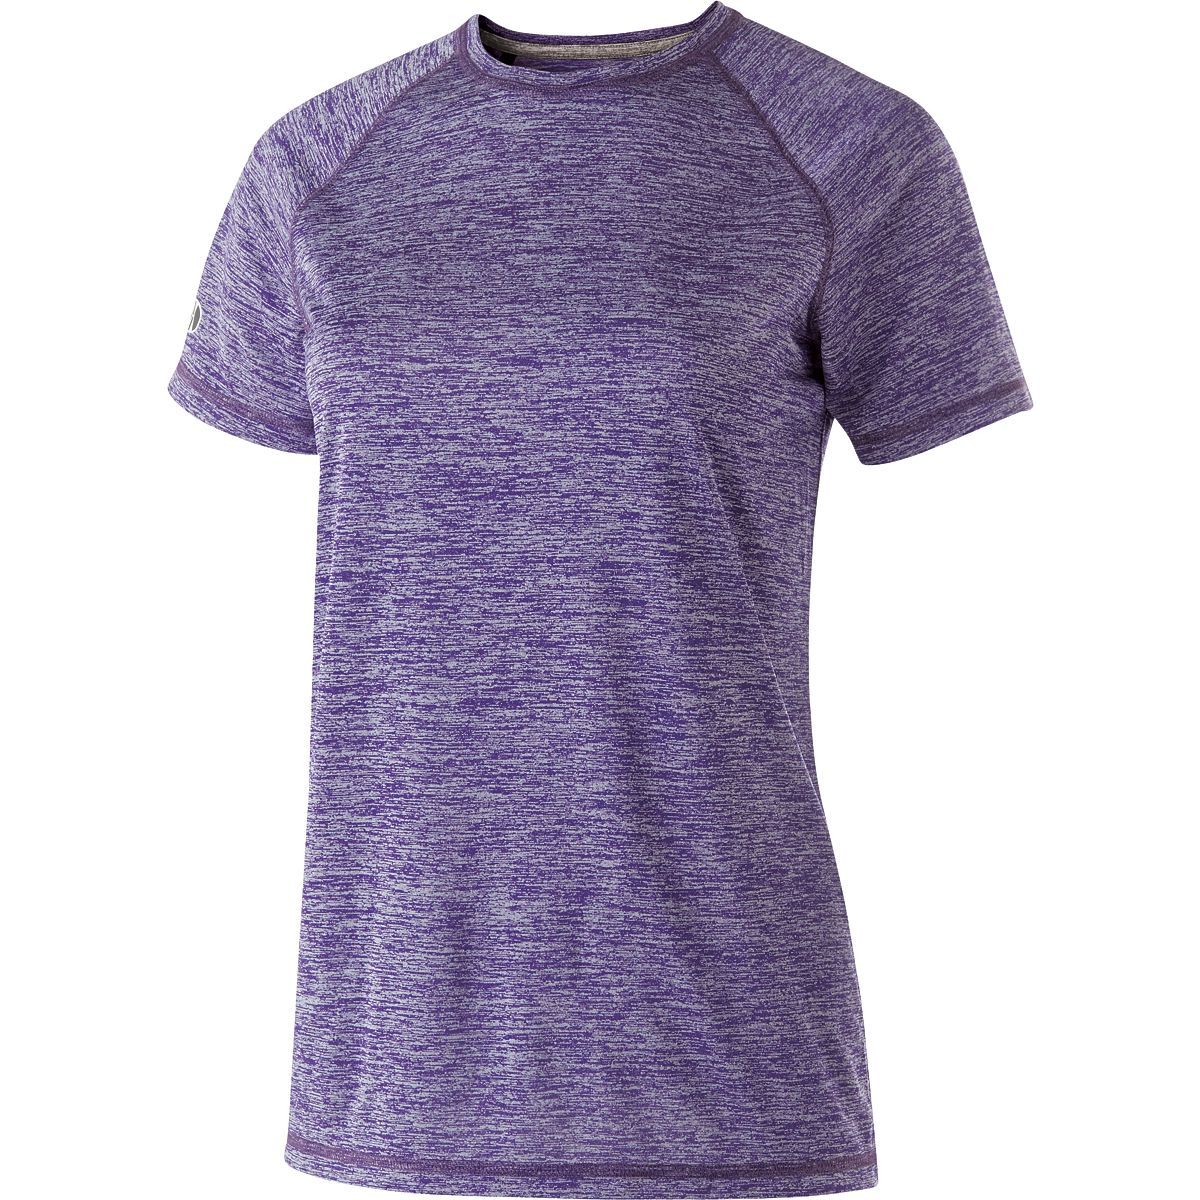 Holloway Ladies Electrify 2.0 Short Sleeve Shirt in Purple Heather  -Part of the Ladies, Holloway, Shirts product lines at KanaleyCreations.com